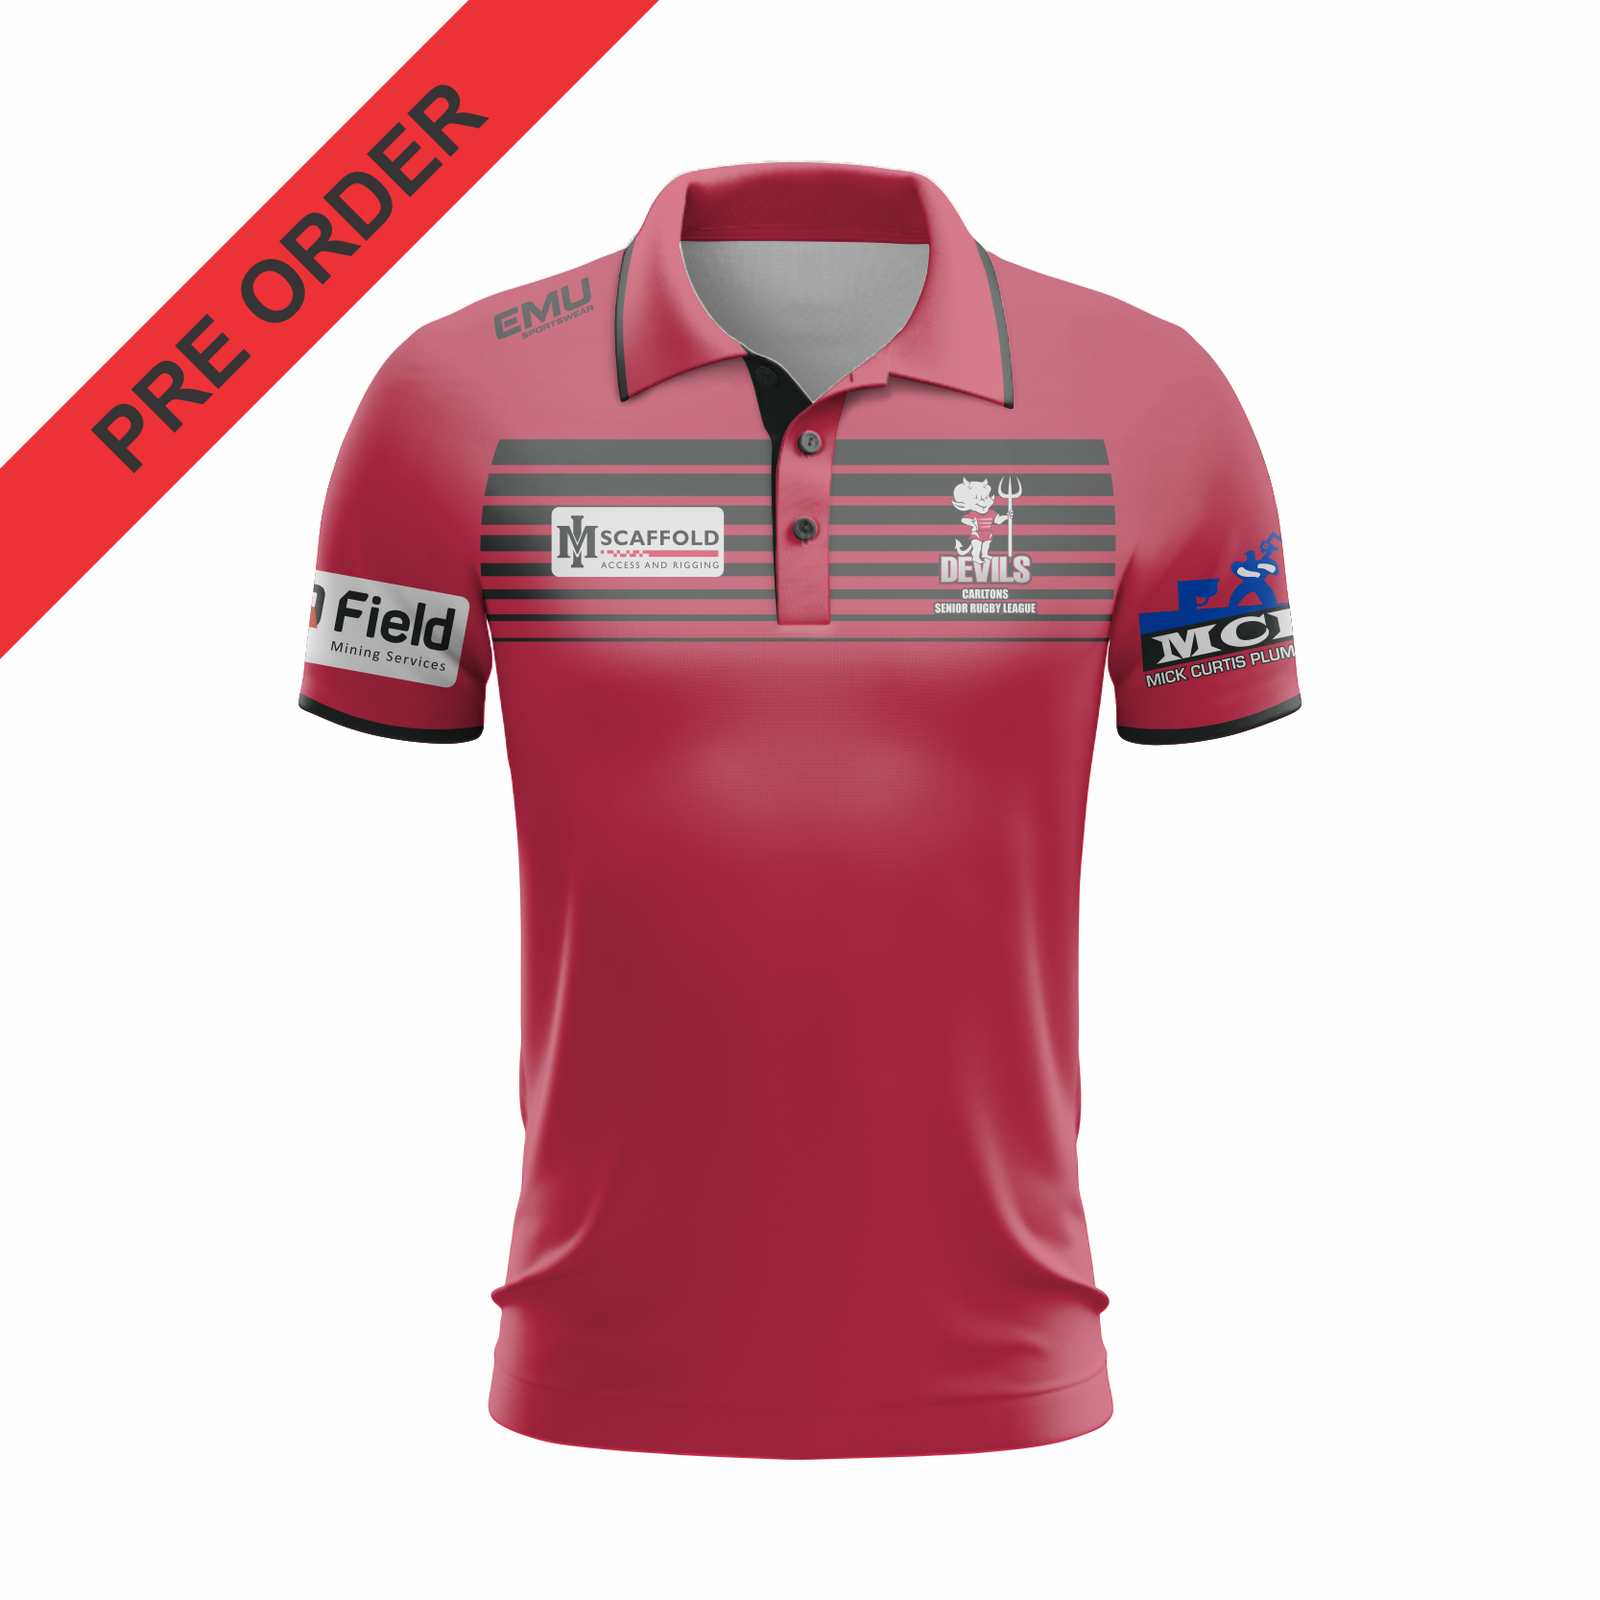 Carltons Senior Rugby League - Supporters Polo